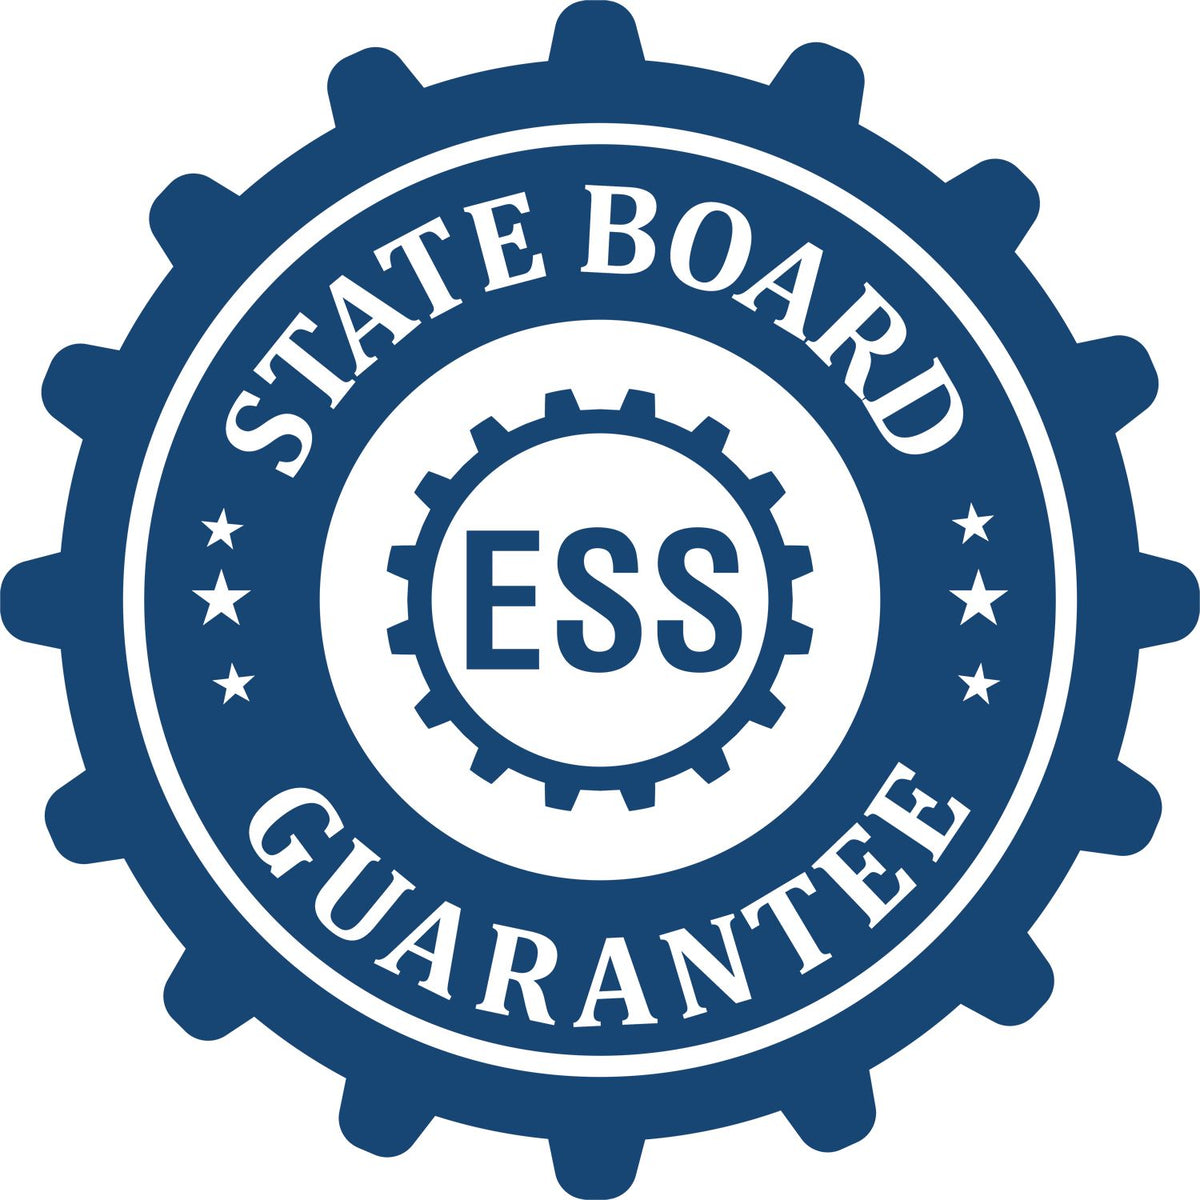 An emblem in a gear shape illustrating a state board guarantee for the Heavy Duty Cast Iron Michigan Architect Embosser product.